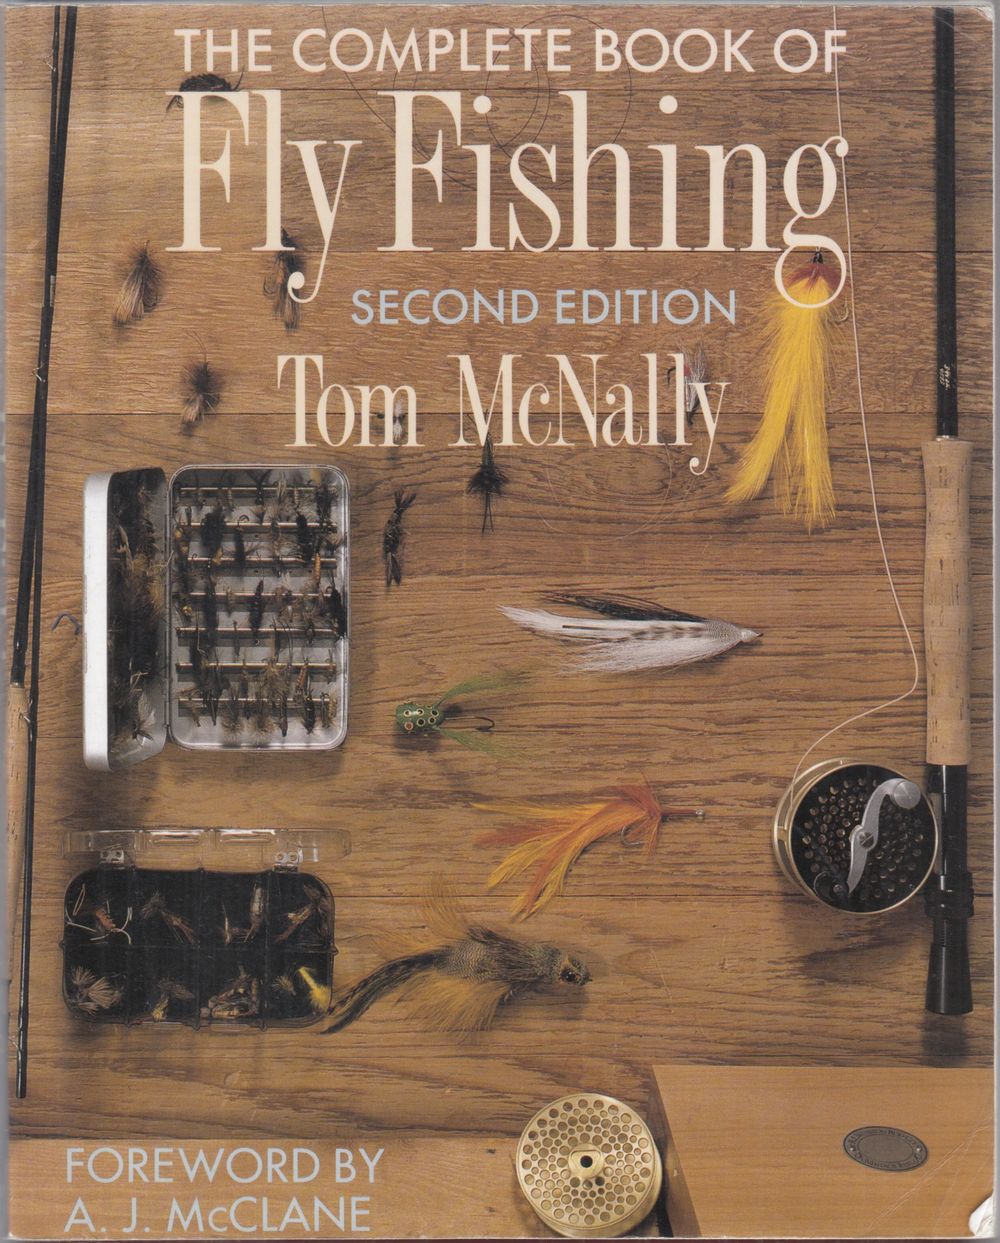 THE COMPLETE BOOK OF FLY FISHING. SECOND EDITION. By Tom McNally. With illustrations by Tom Beecham. - McNally (Tom).